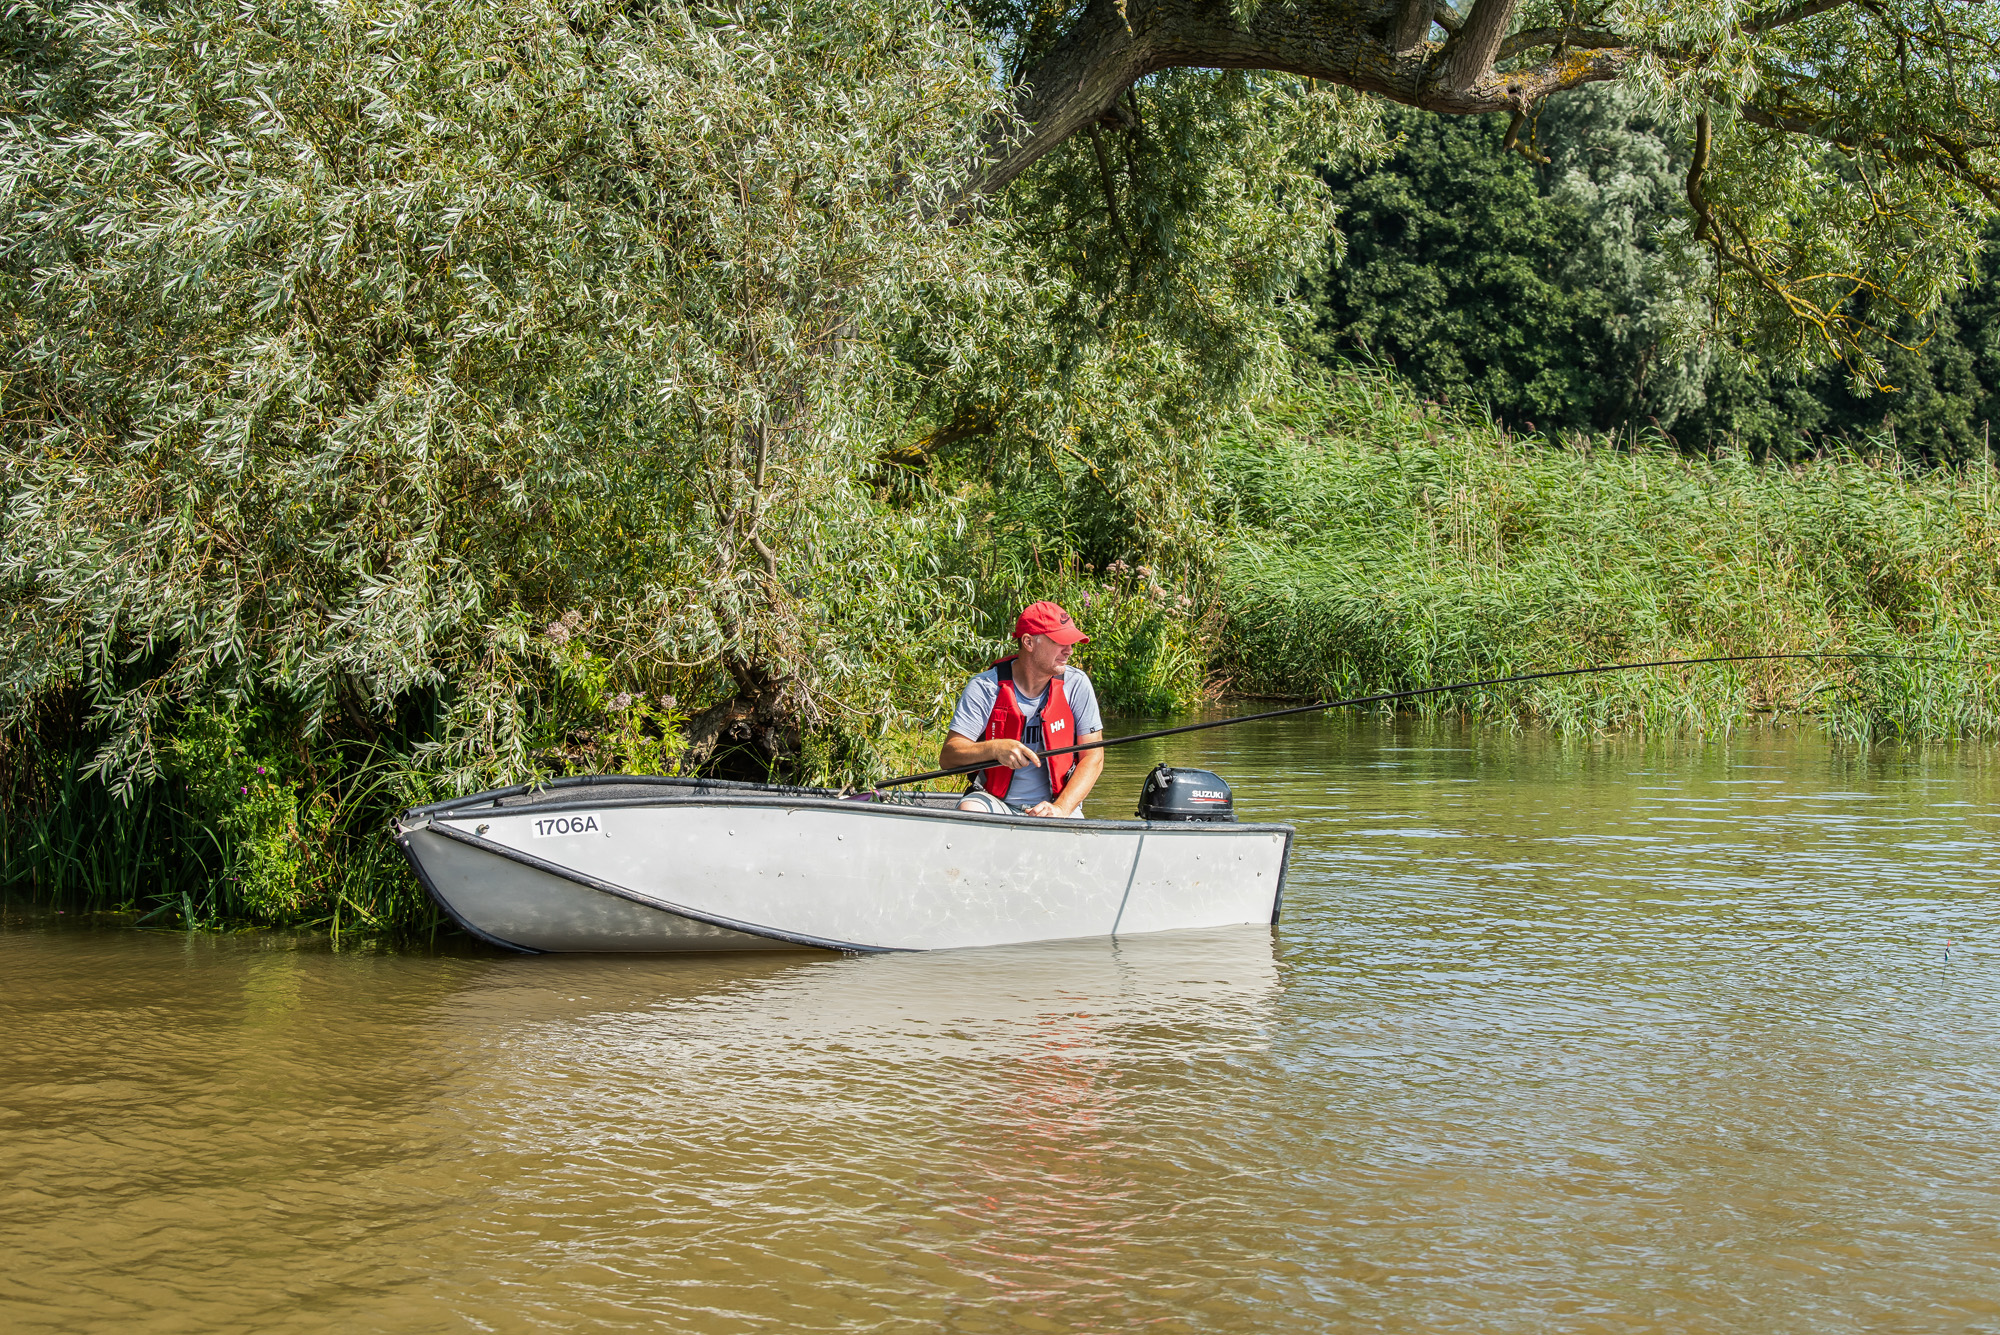 a man fishing from a boat in the broads surrounded by riverbank vegetation